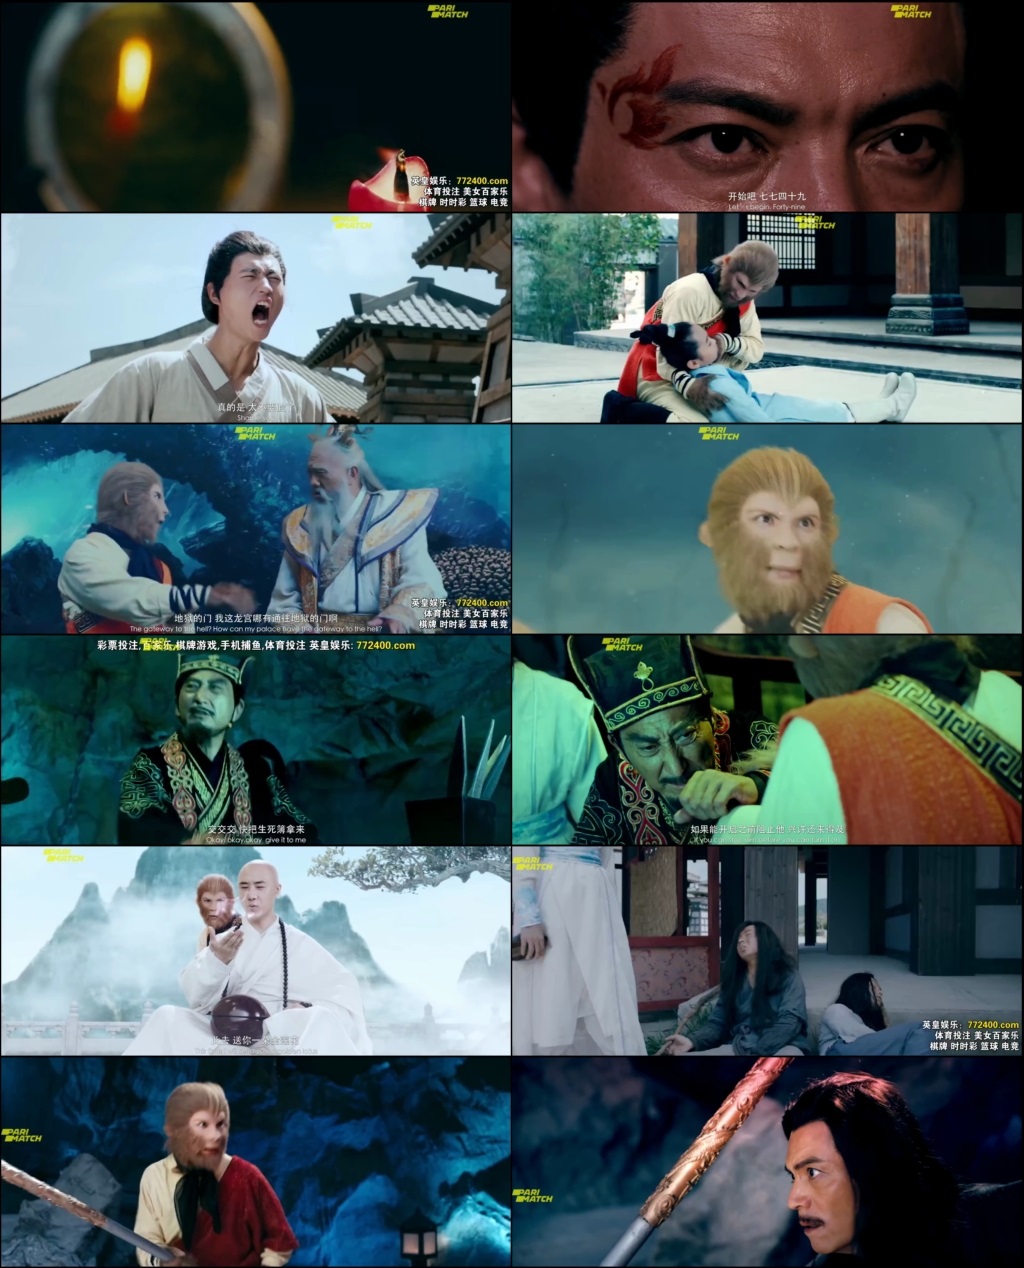 Monkey king vs mirror of death 2020 HDRip 750MB Hindi (Voice Over) Dual Audio 720p Download